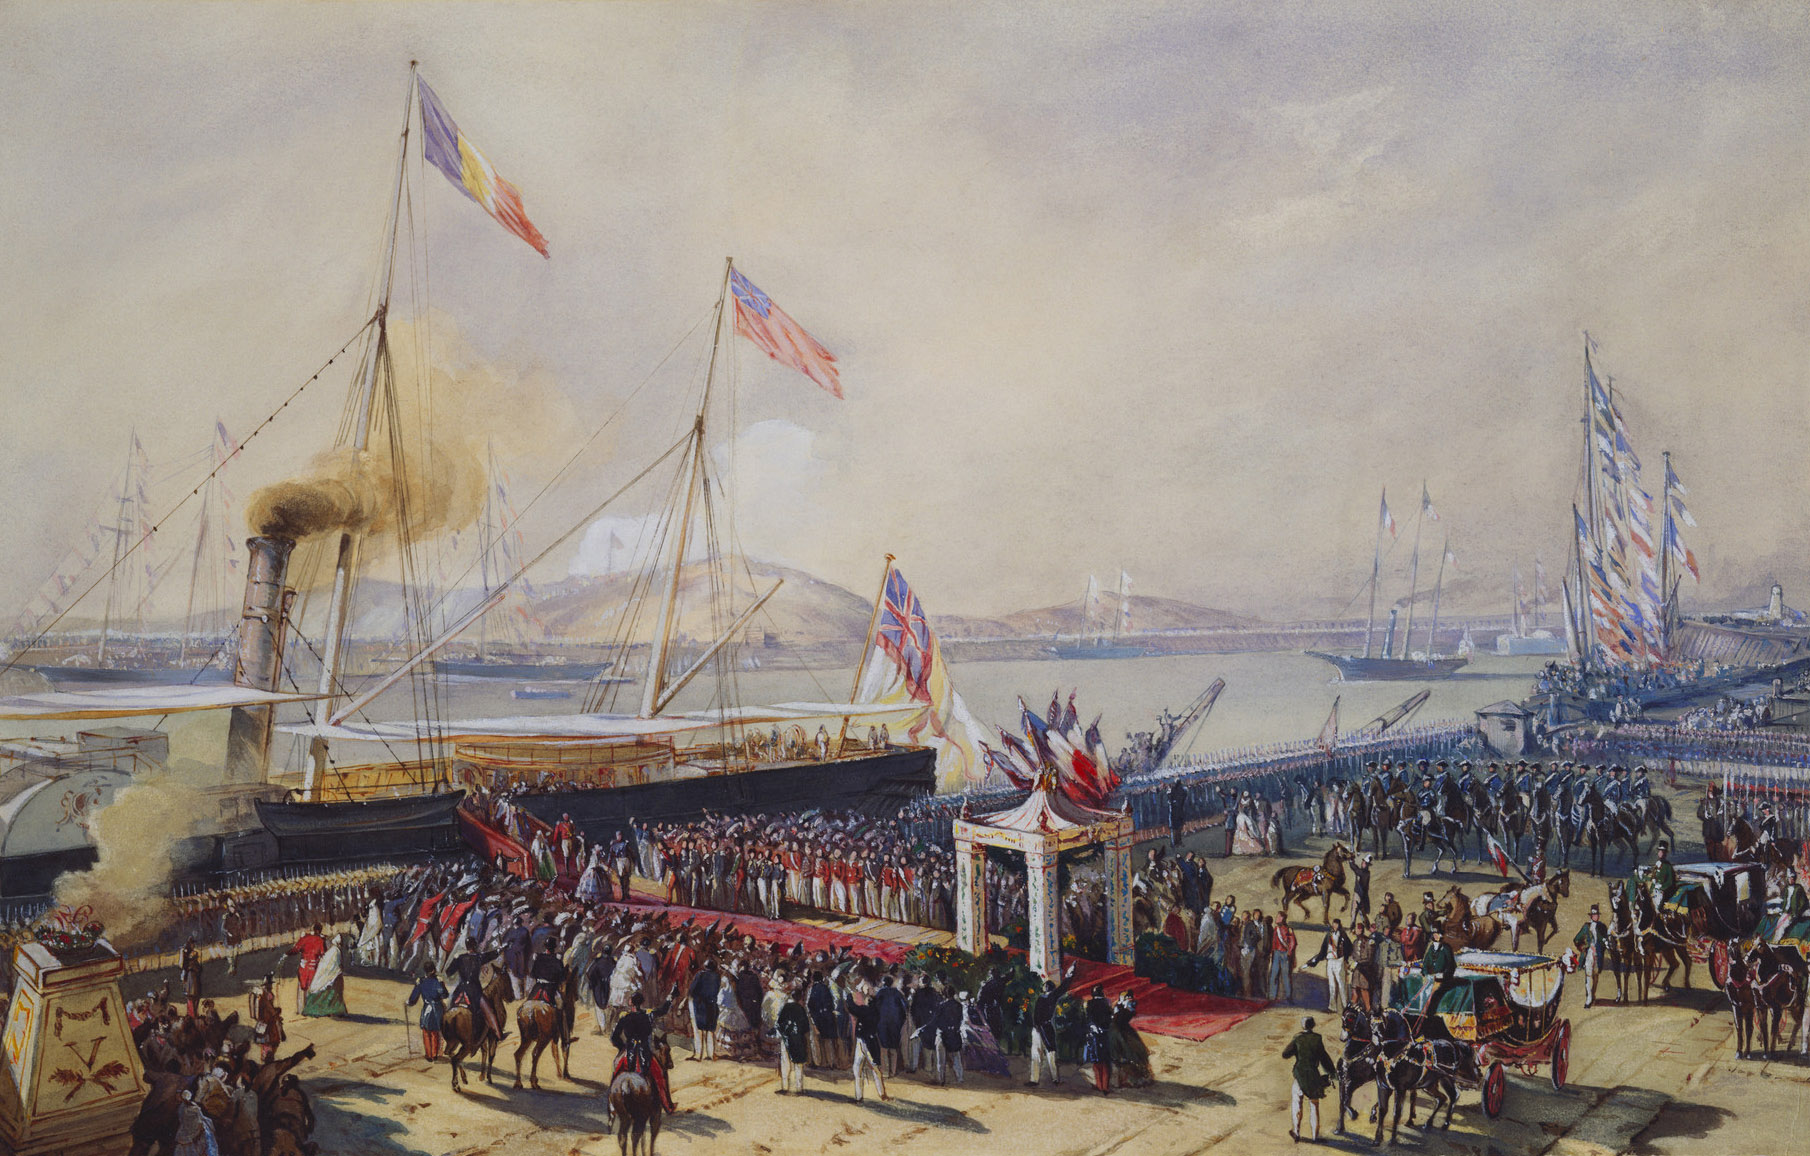 A watercolour showing Queen Victoria landing at Boulogne on 18 August 1855. After a watercolour by Antoine L&eacute;on Morel-Fatio (RCIN 451380).&nbsp;A large crowd is shown assembled in the foreground, either side of a red carpet. Queen Victoria and Prin